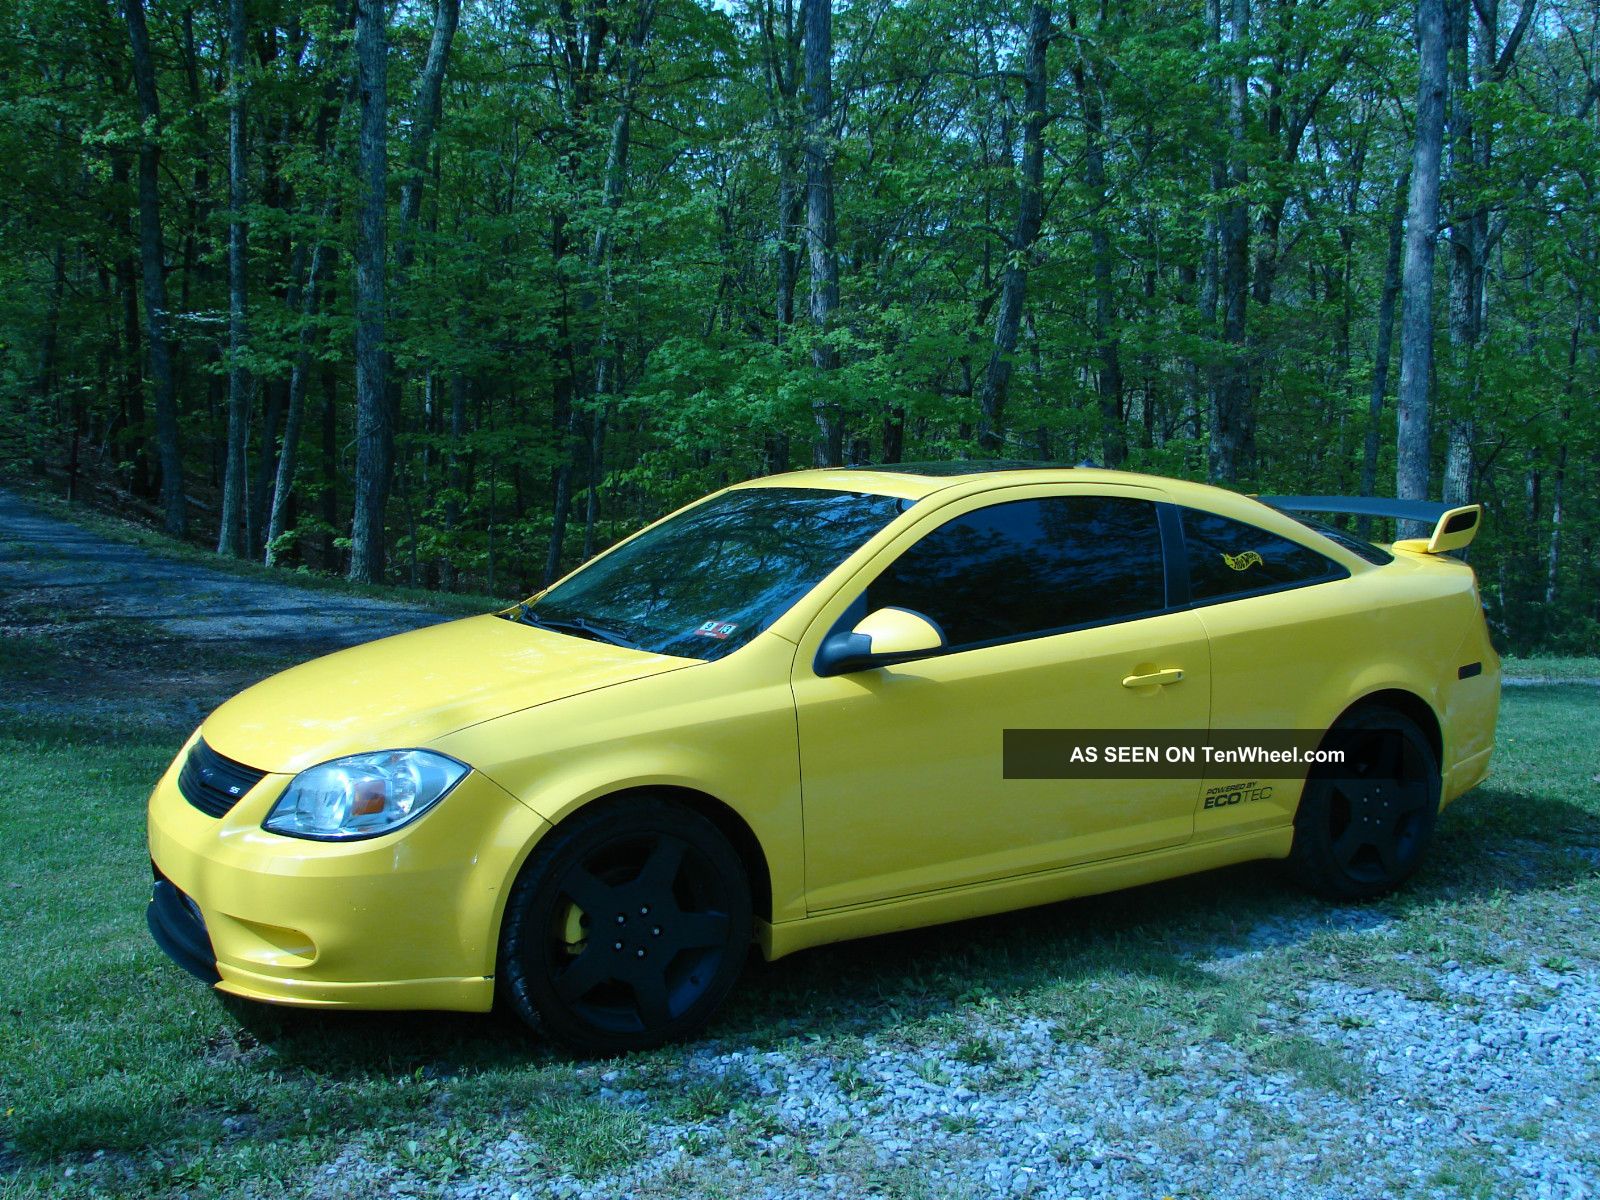 Stage 3 2005 Chevrolet Cobalt Ss Coupe Supercharged Yellow 5 Speed Cobalt photo